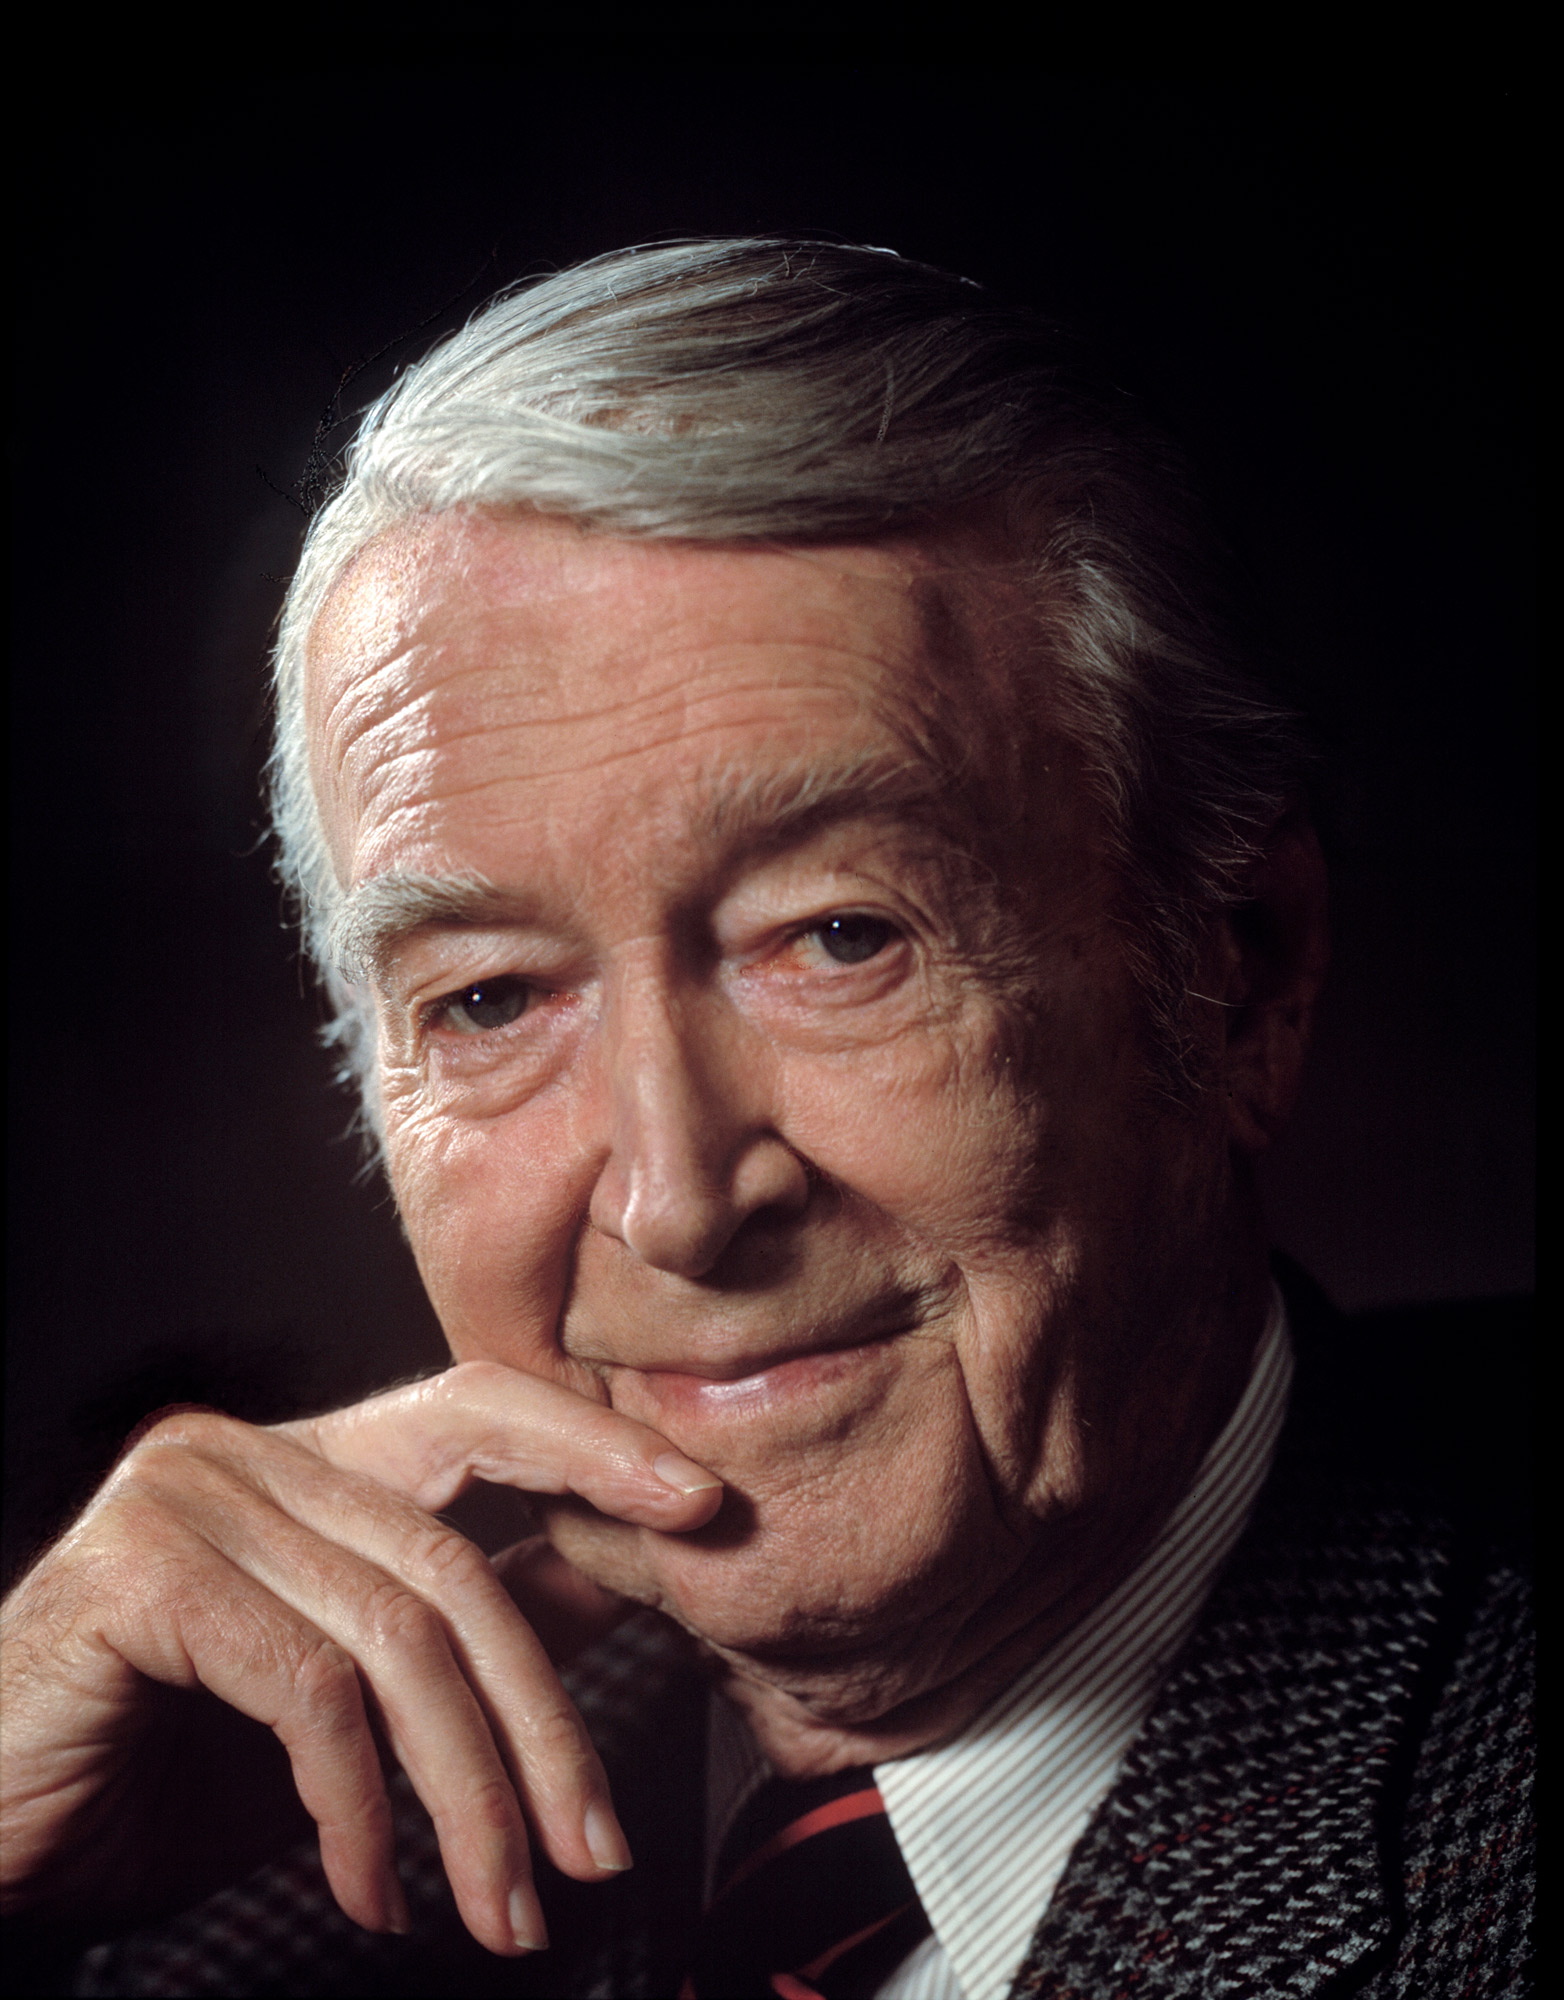 James Stewart at an old age with his hand on his chin